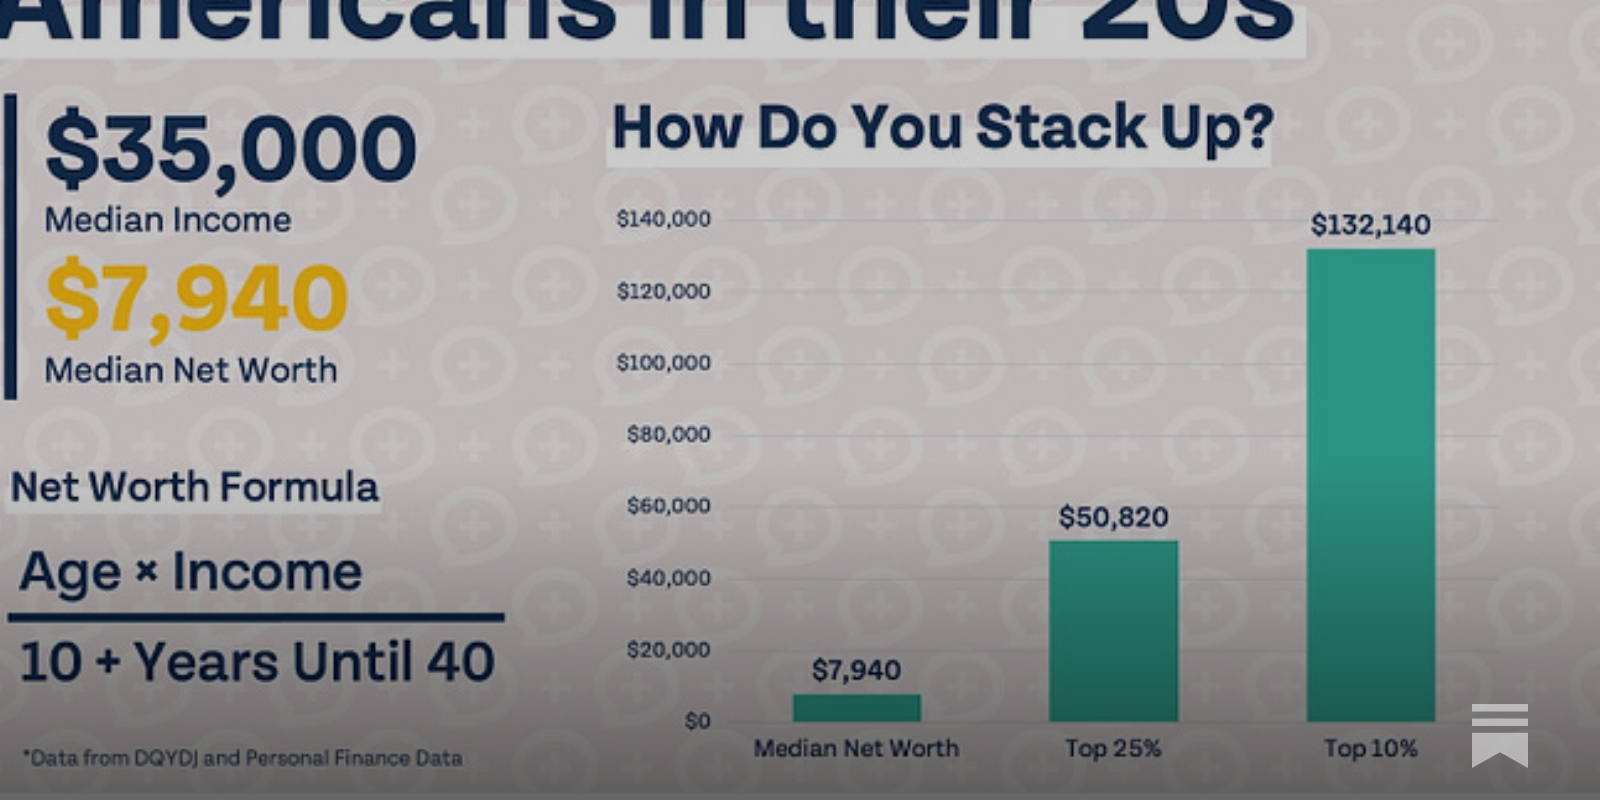 Net Worth By Age in 2023: How Do You Stack Up?